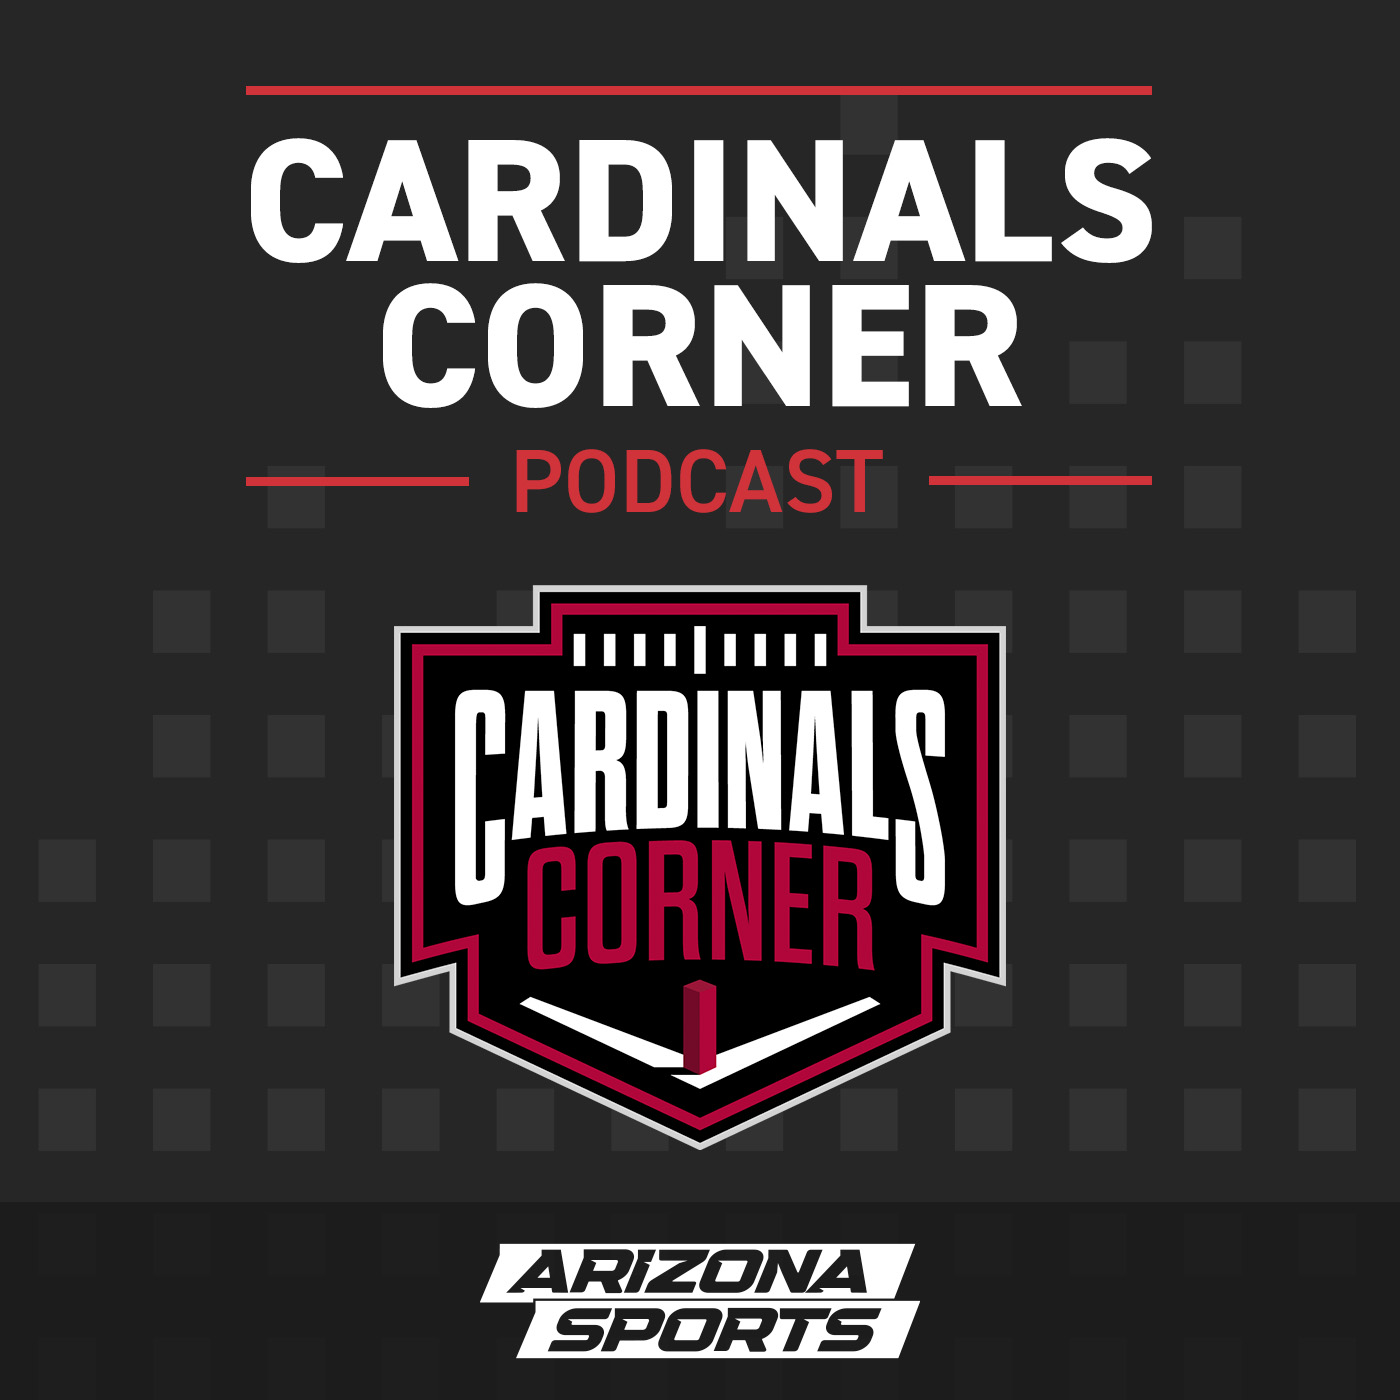 Could Cardinals QB Kyler Murray missing time be a blessing in disguise? - April 10